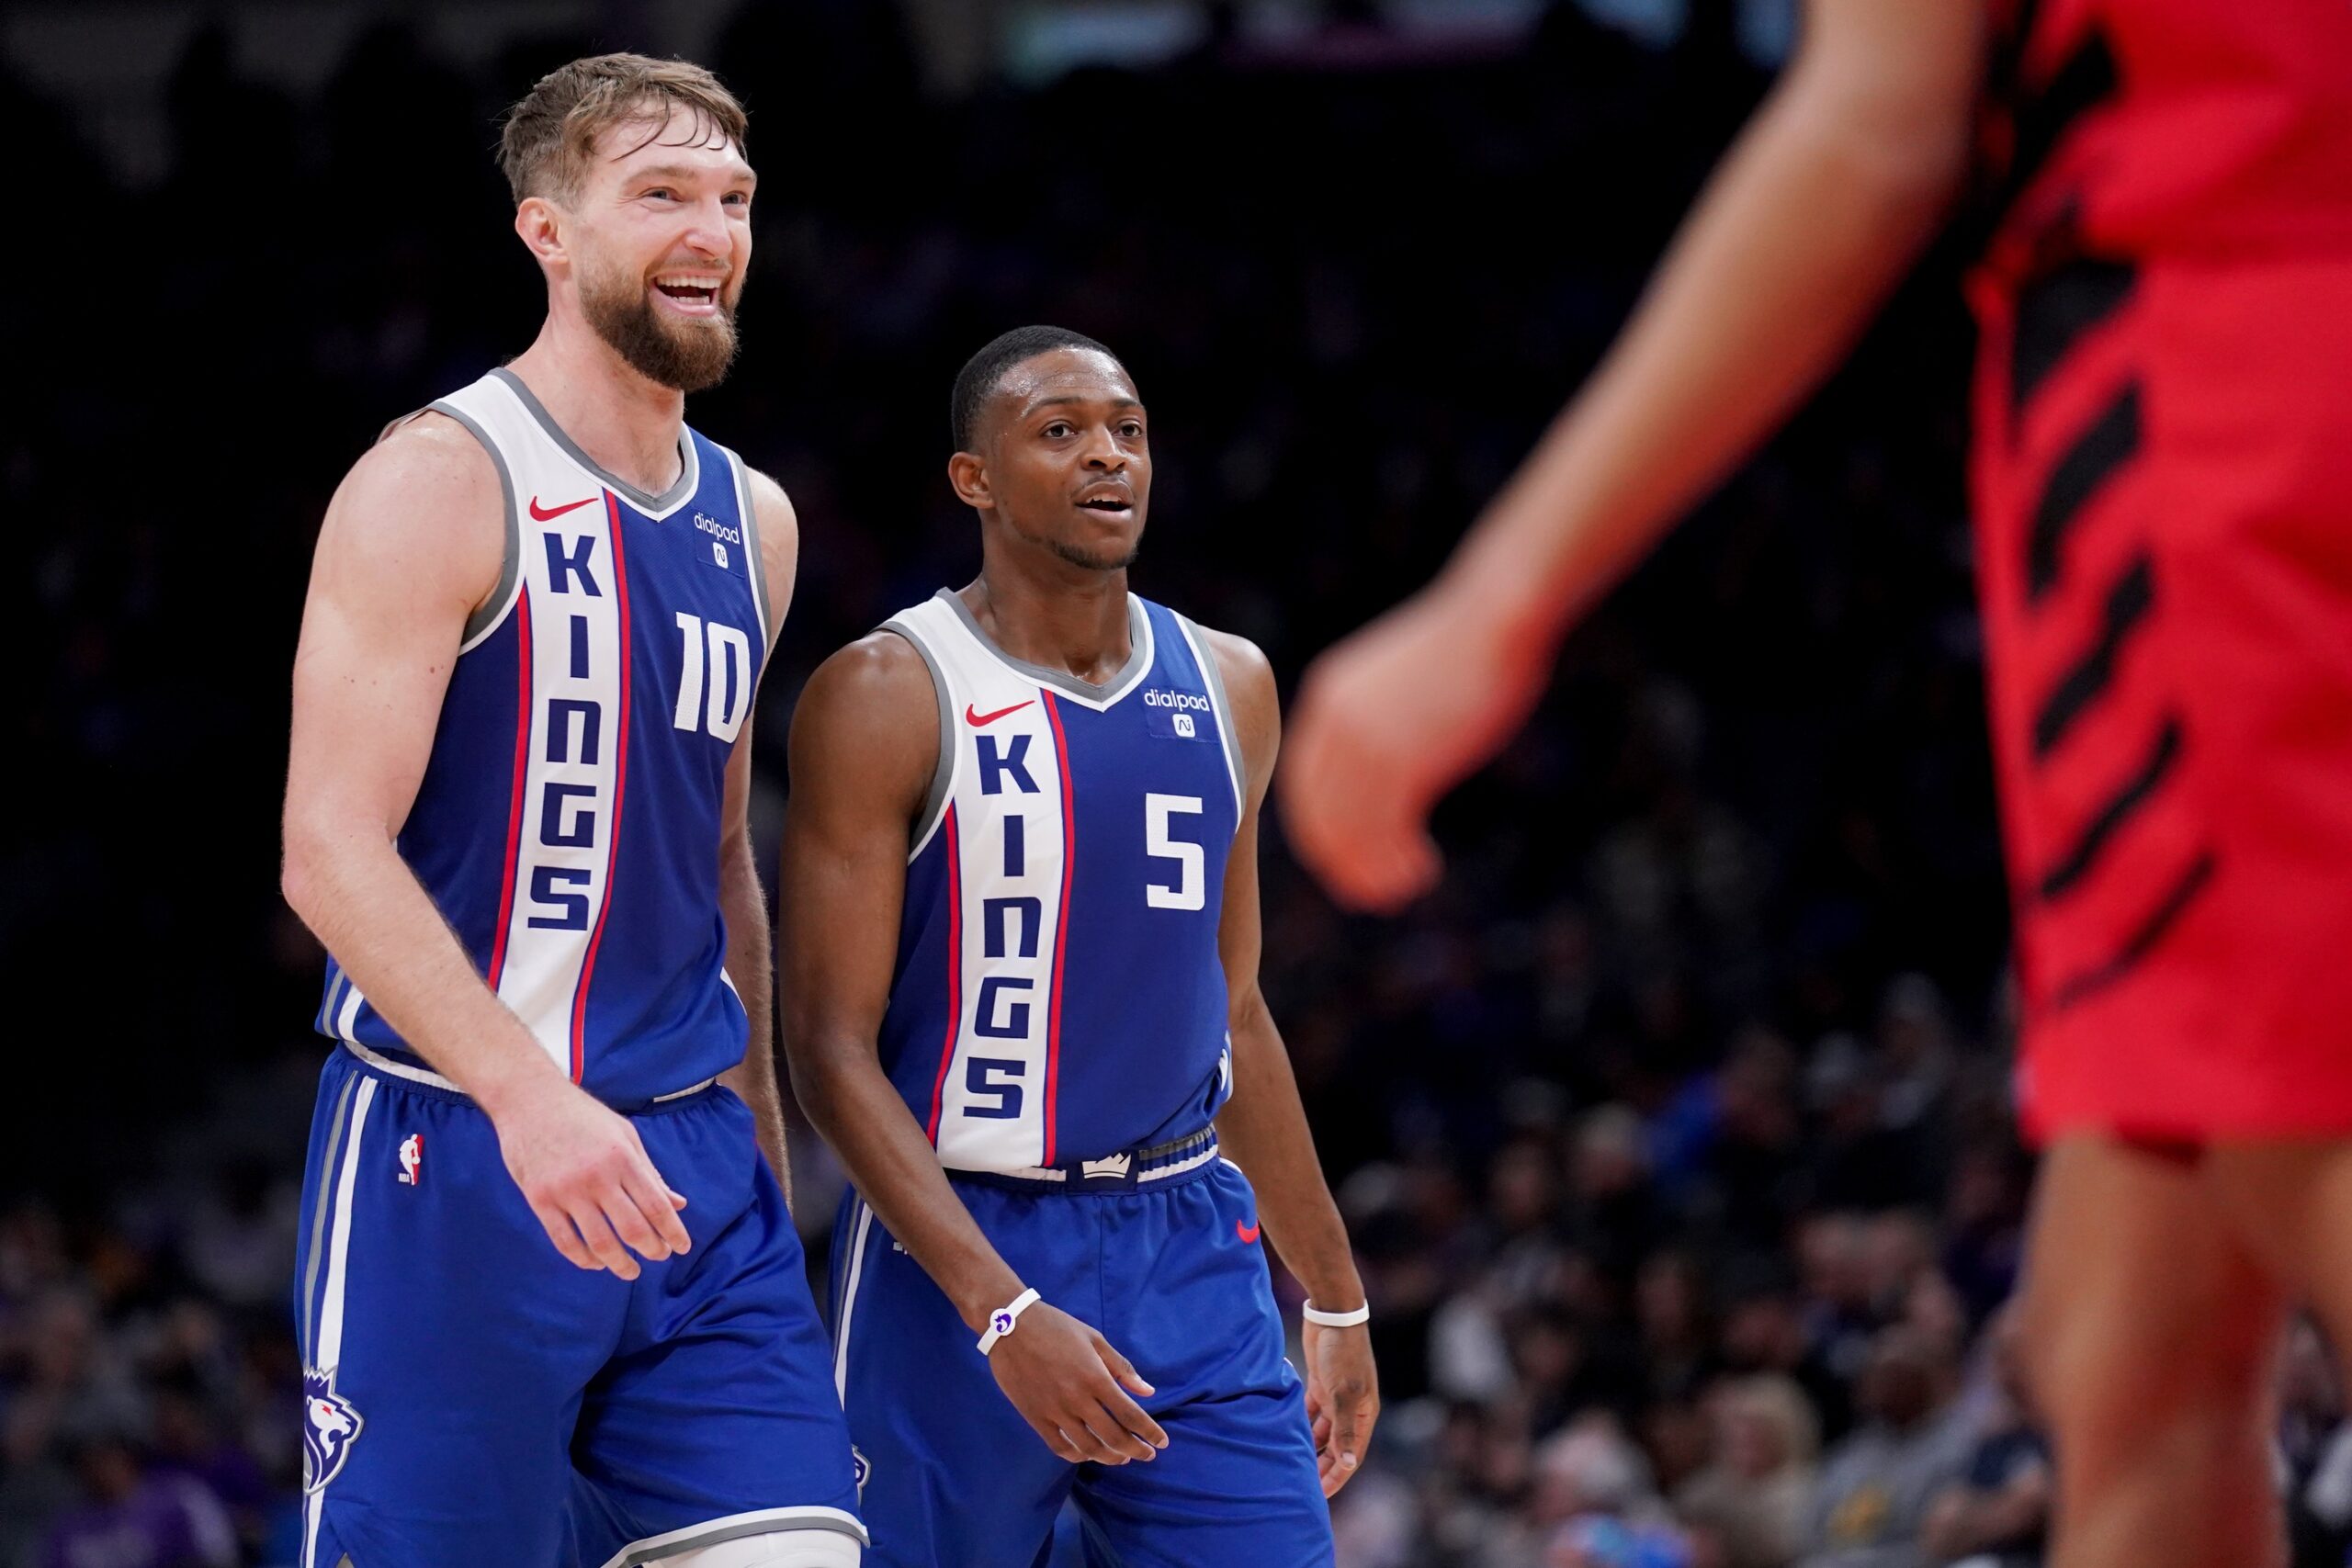 Sacramento Kings forward Domantas Sabonis (10) and guard De'Aaron Fox (5) walk on the court during a break in the action against the Portland Trail Blazers in the third quarter at the Golden 1 Center.